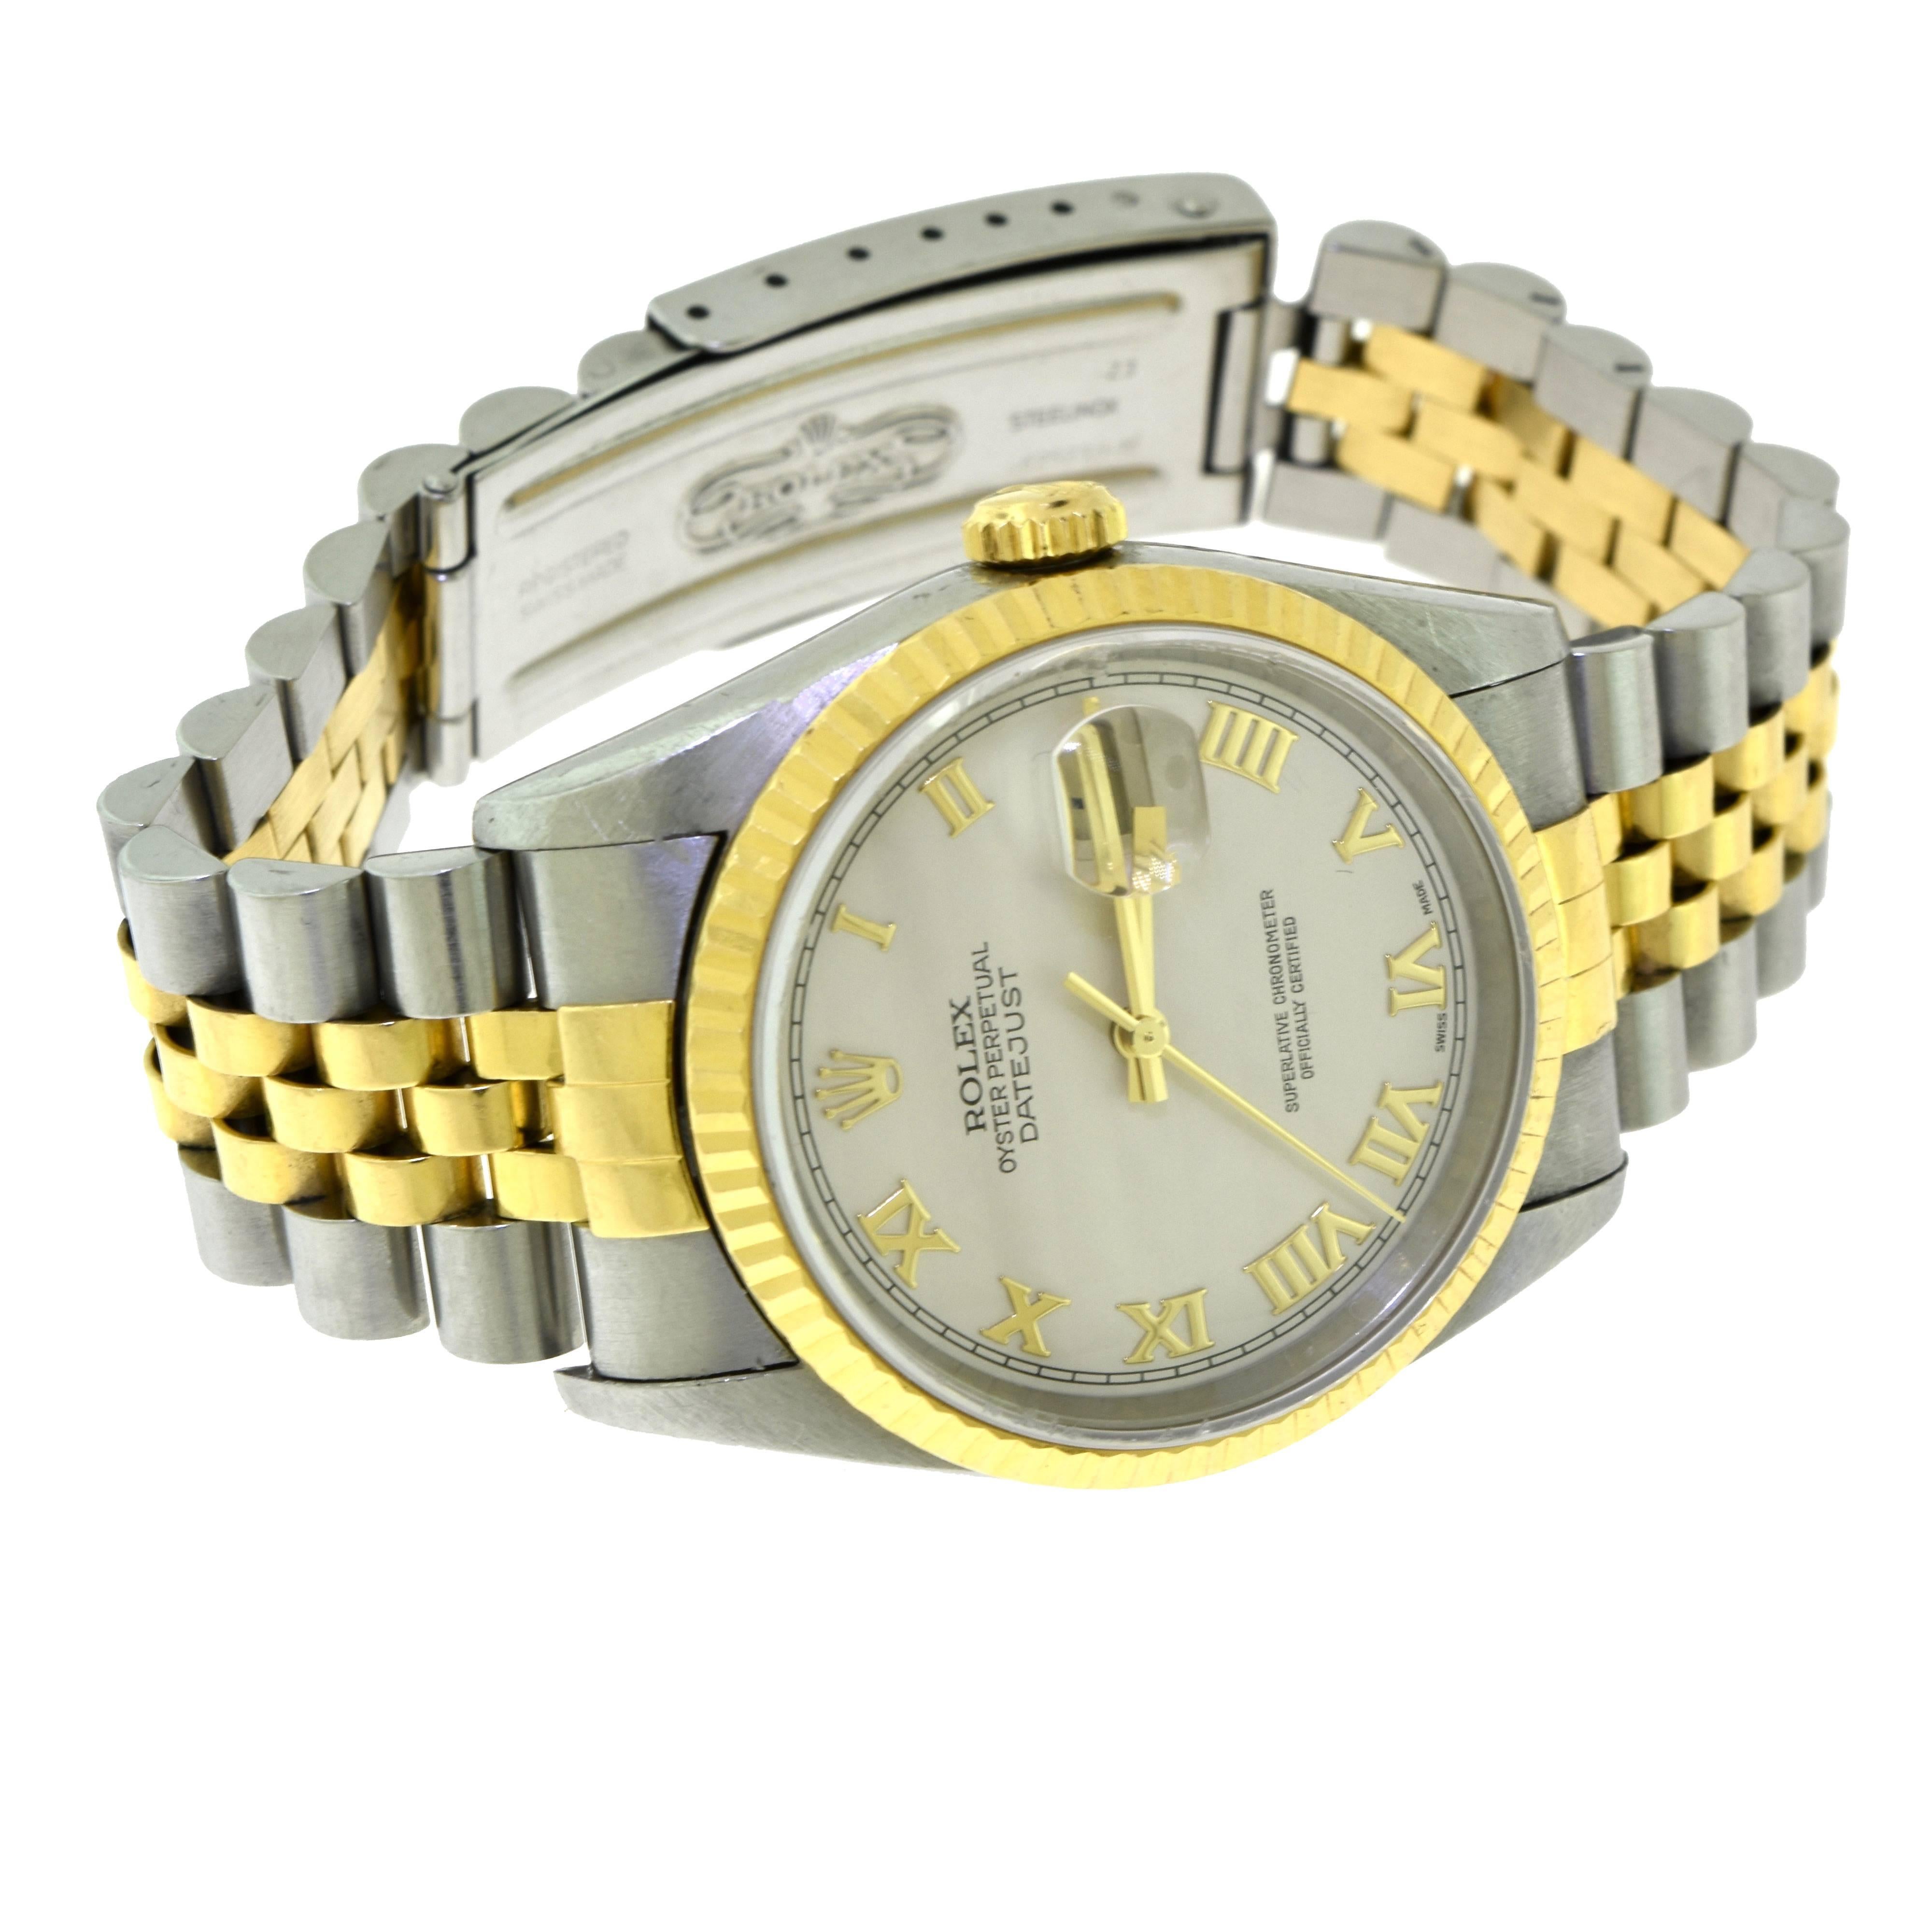 This is a beautiful Rolex Model Datejust Steel Yellow Gold Ivory Pyramid Dial Mens Watch with Model Number 16233.
Movement: officially certified chronometer automatic self-winding movement. Calibre is 3135 and has 31 jewels. The case size is 36 mm